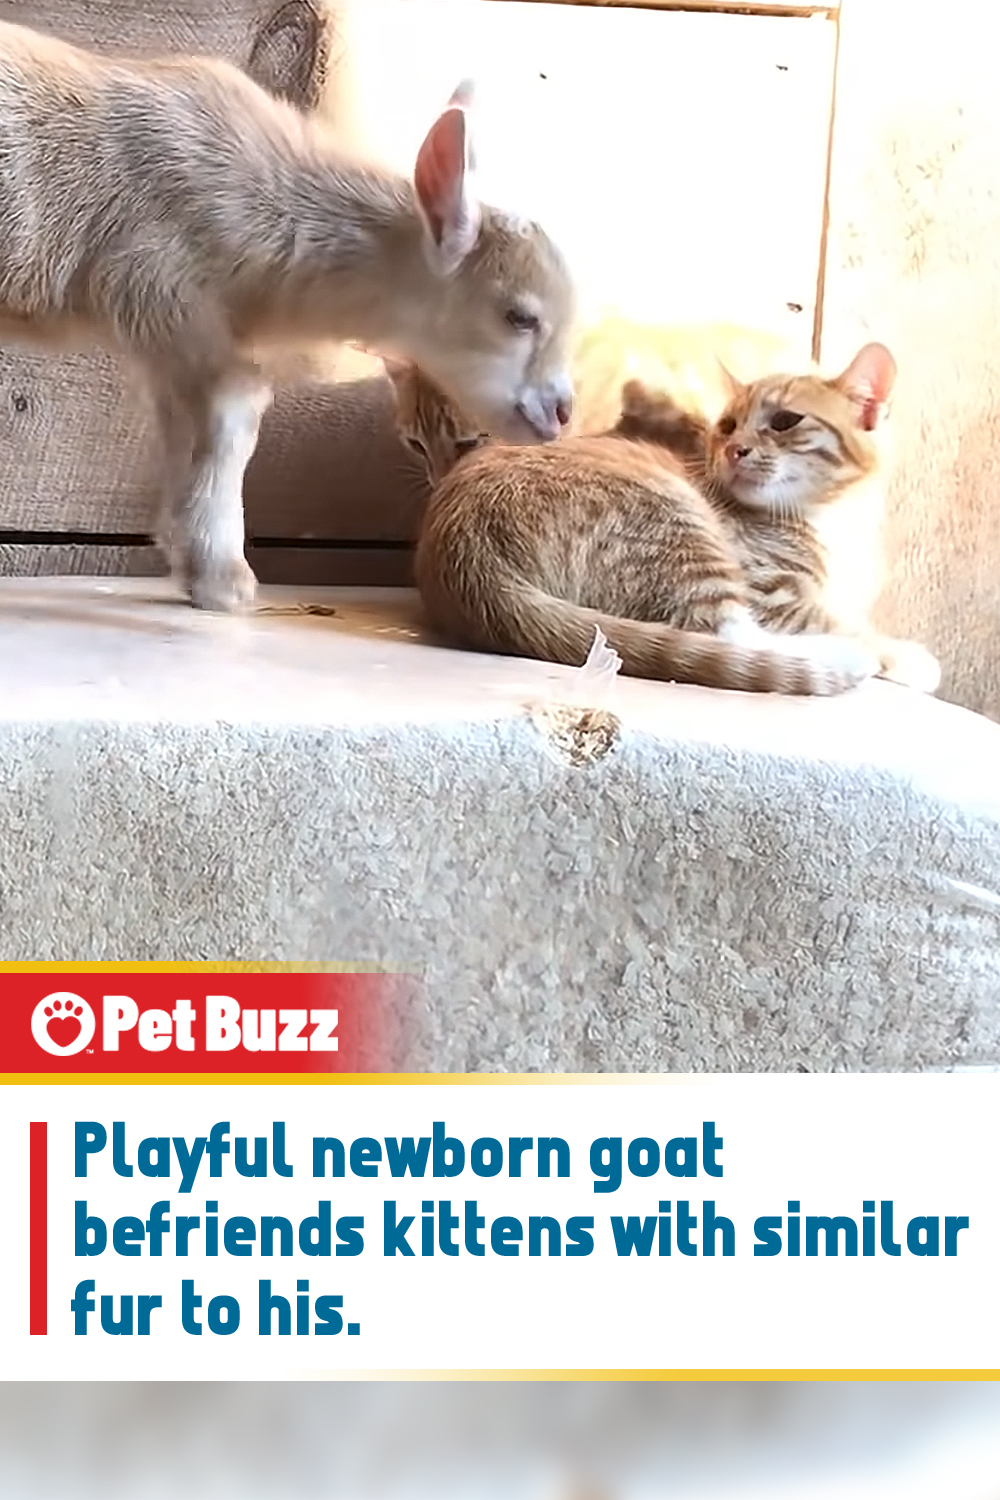 Playful newborn goat befriends kittens with similar fur to his.